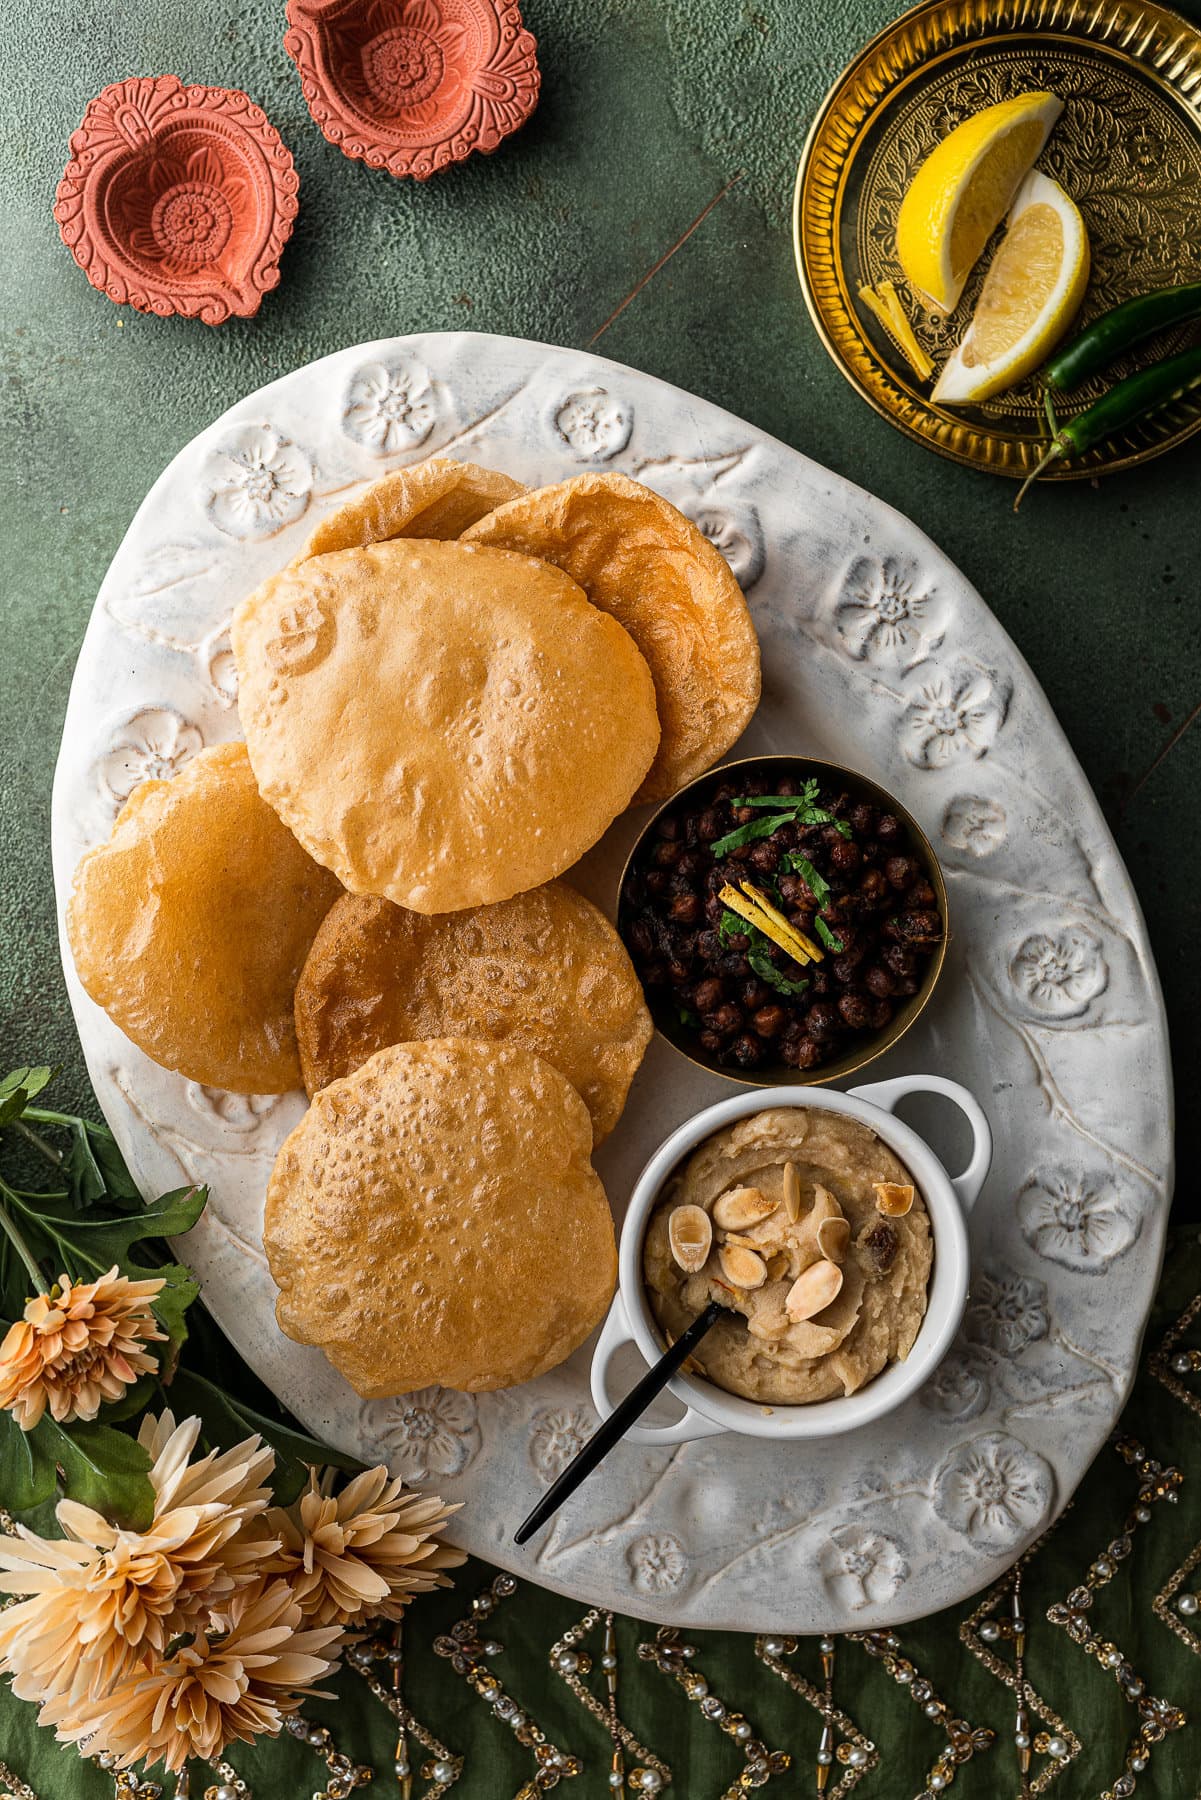 Halwa, puris, and chana in a decorative platter for Navratri